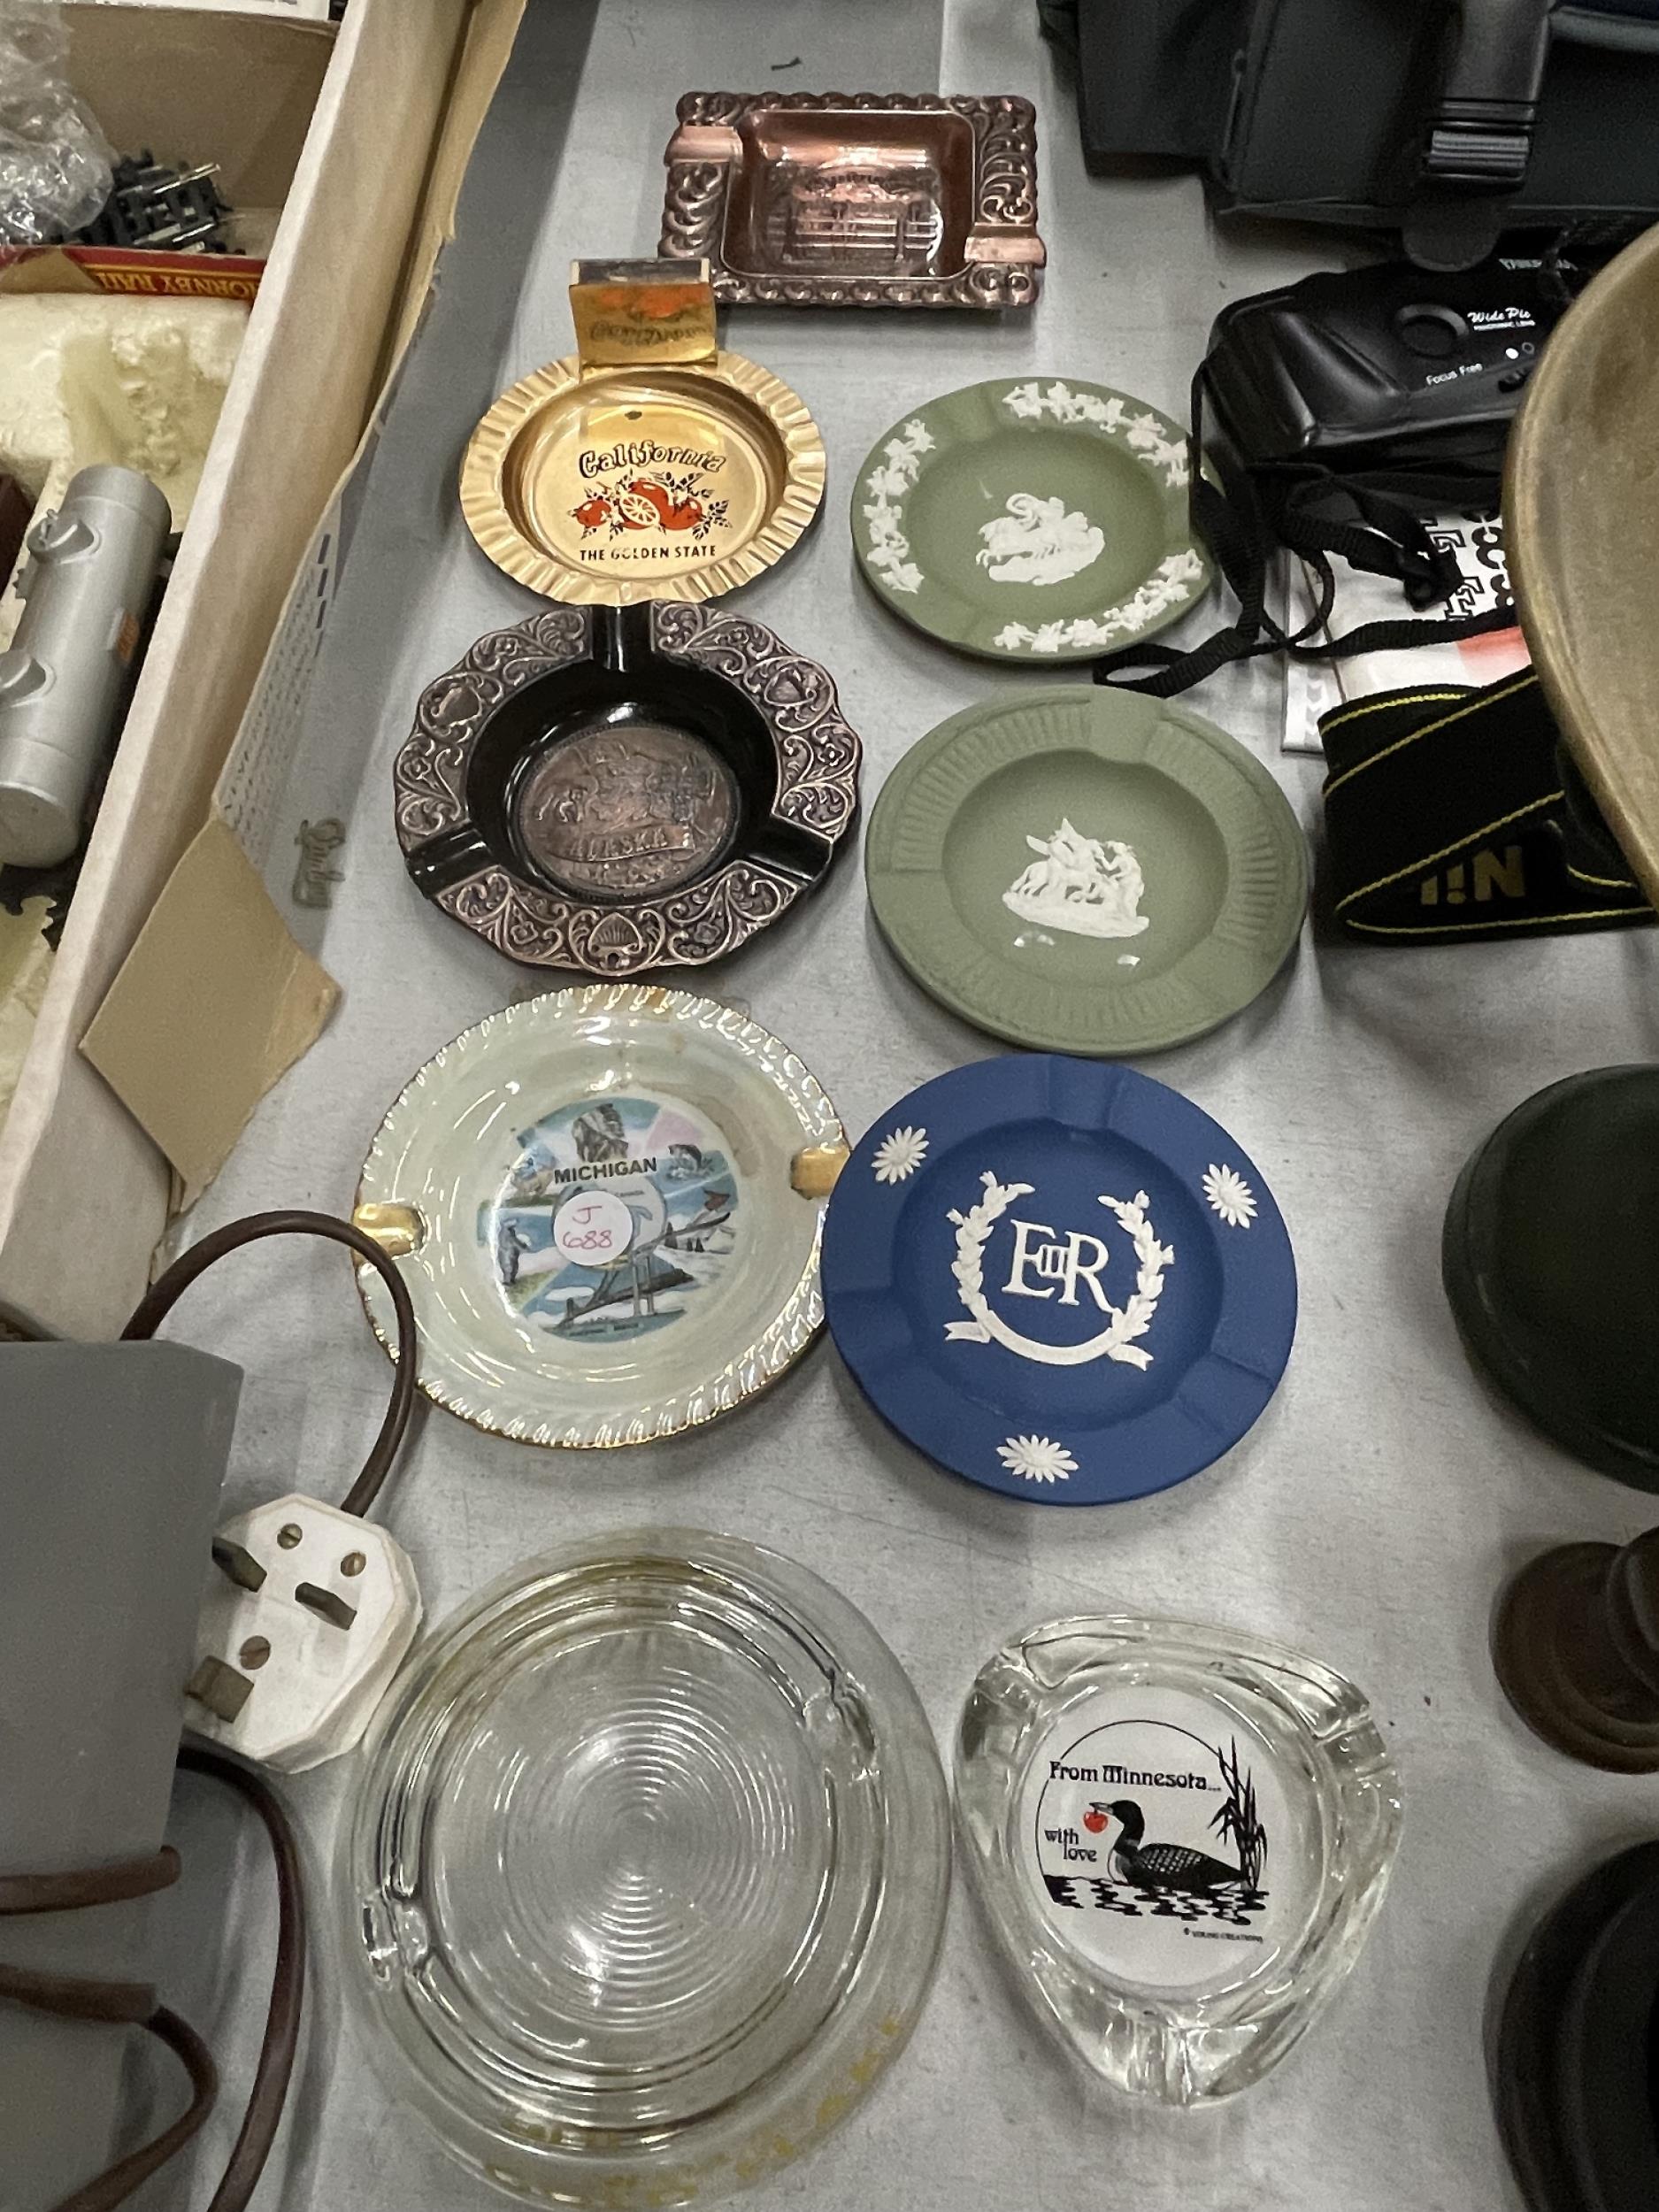 A QUANTITY OF VINTAGE ASHTRAYS TO INCLUDE WEDGWOOD JASPERWARE AND A WILL'S GOLD FLAKE